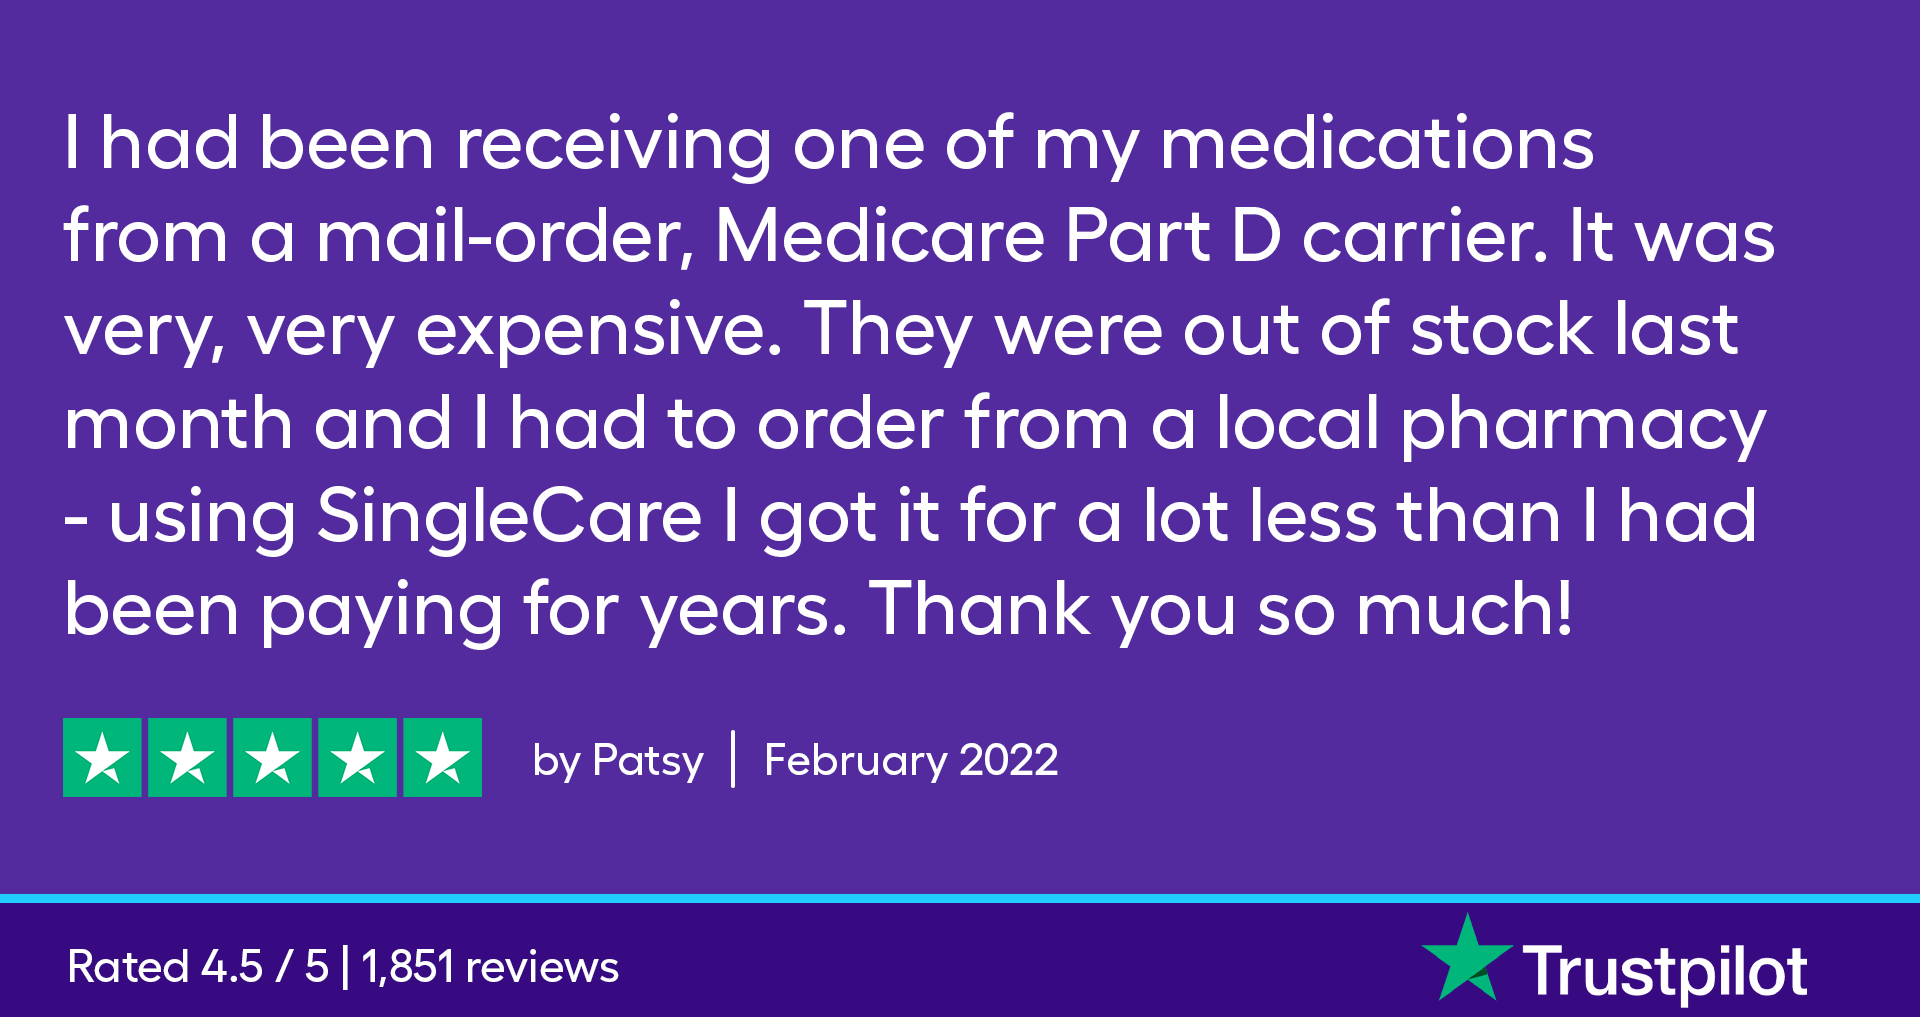 I had been receiving one of my medications from a mail-order, Medicare Part D carrier. It was very, very expensive. They were out of stock last month and I had to order from a local pharmacy- using SingleCare I got it for a lot less than I had been paying for years. Thank you so much! 